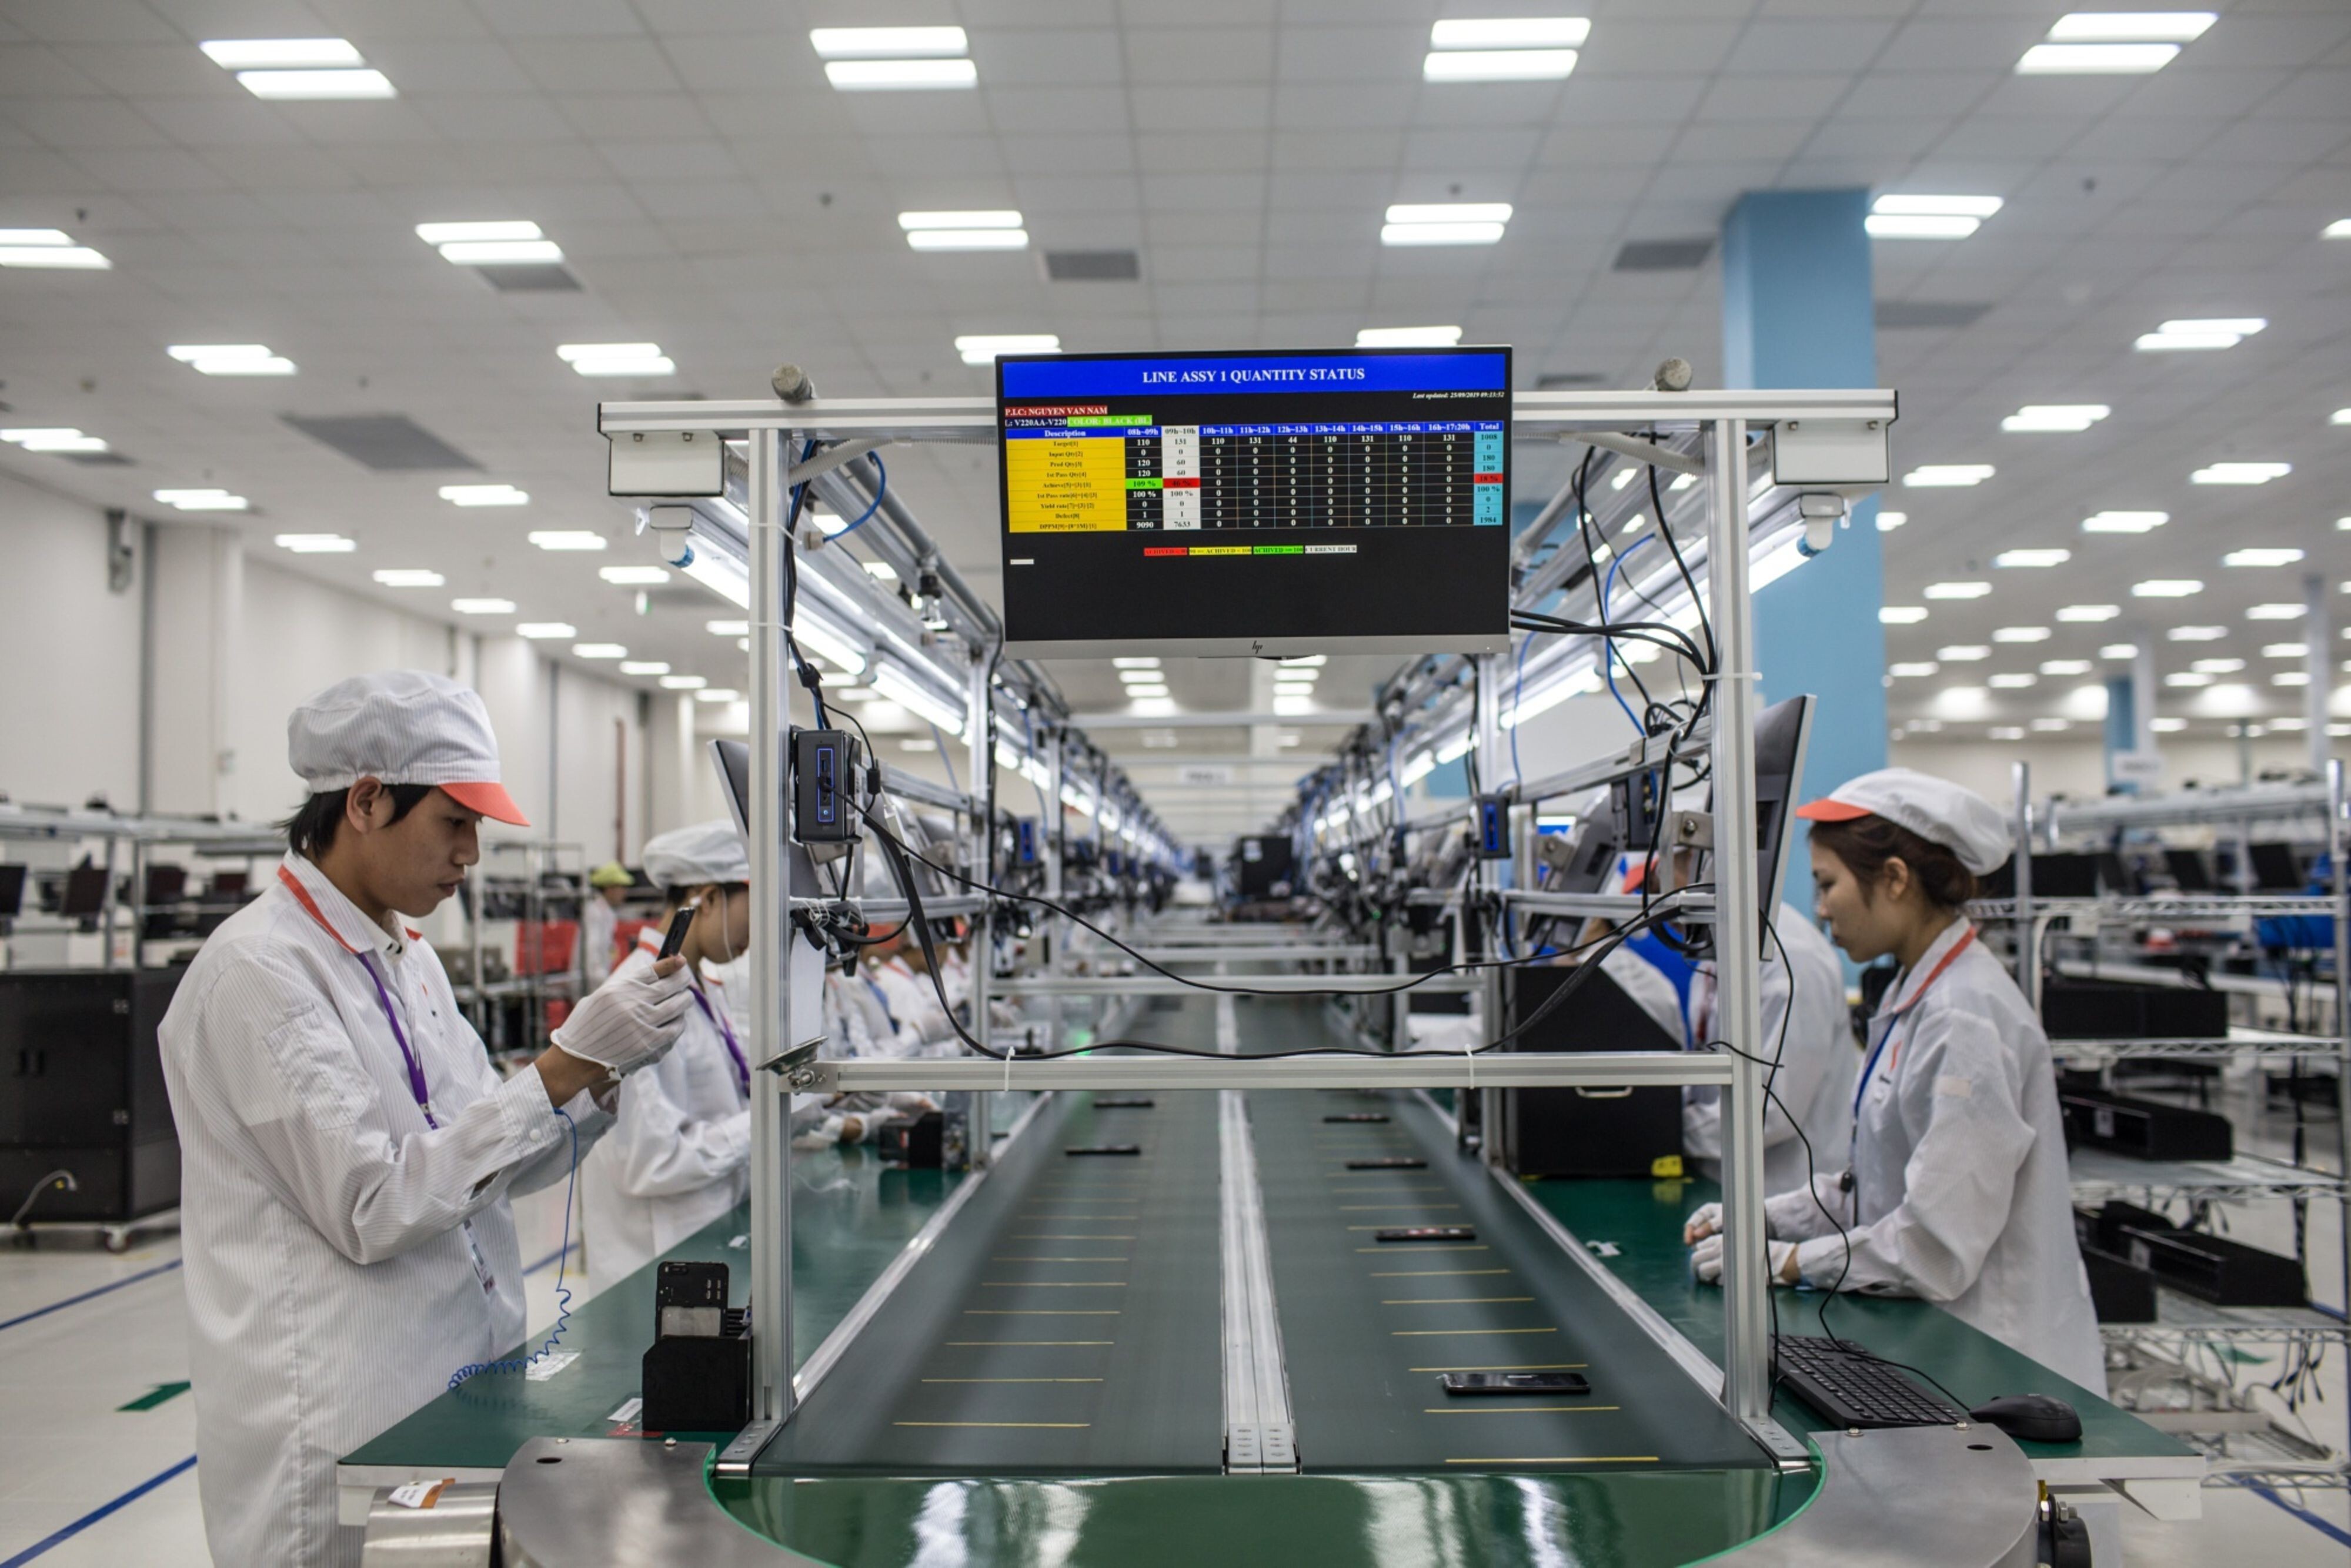 Workers perform quality checks on smartphones at the VinSmart factory at the Hoa Lac Hi-Tech Park in Hanoi, Vietnam, on September 25, 2019. Photo: Bloomberg